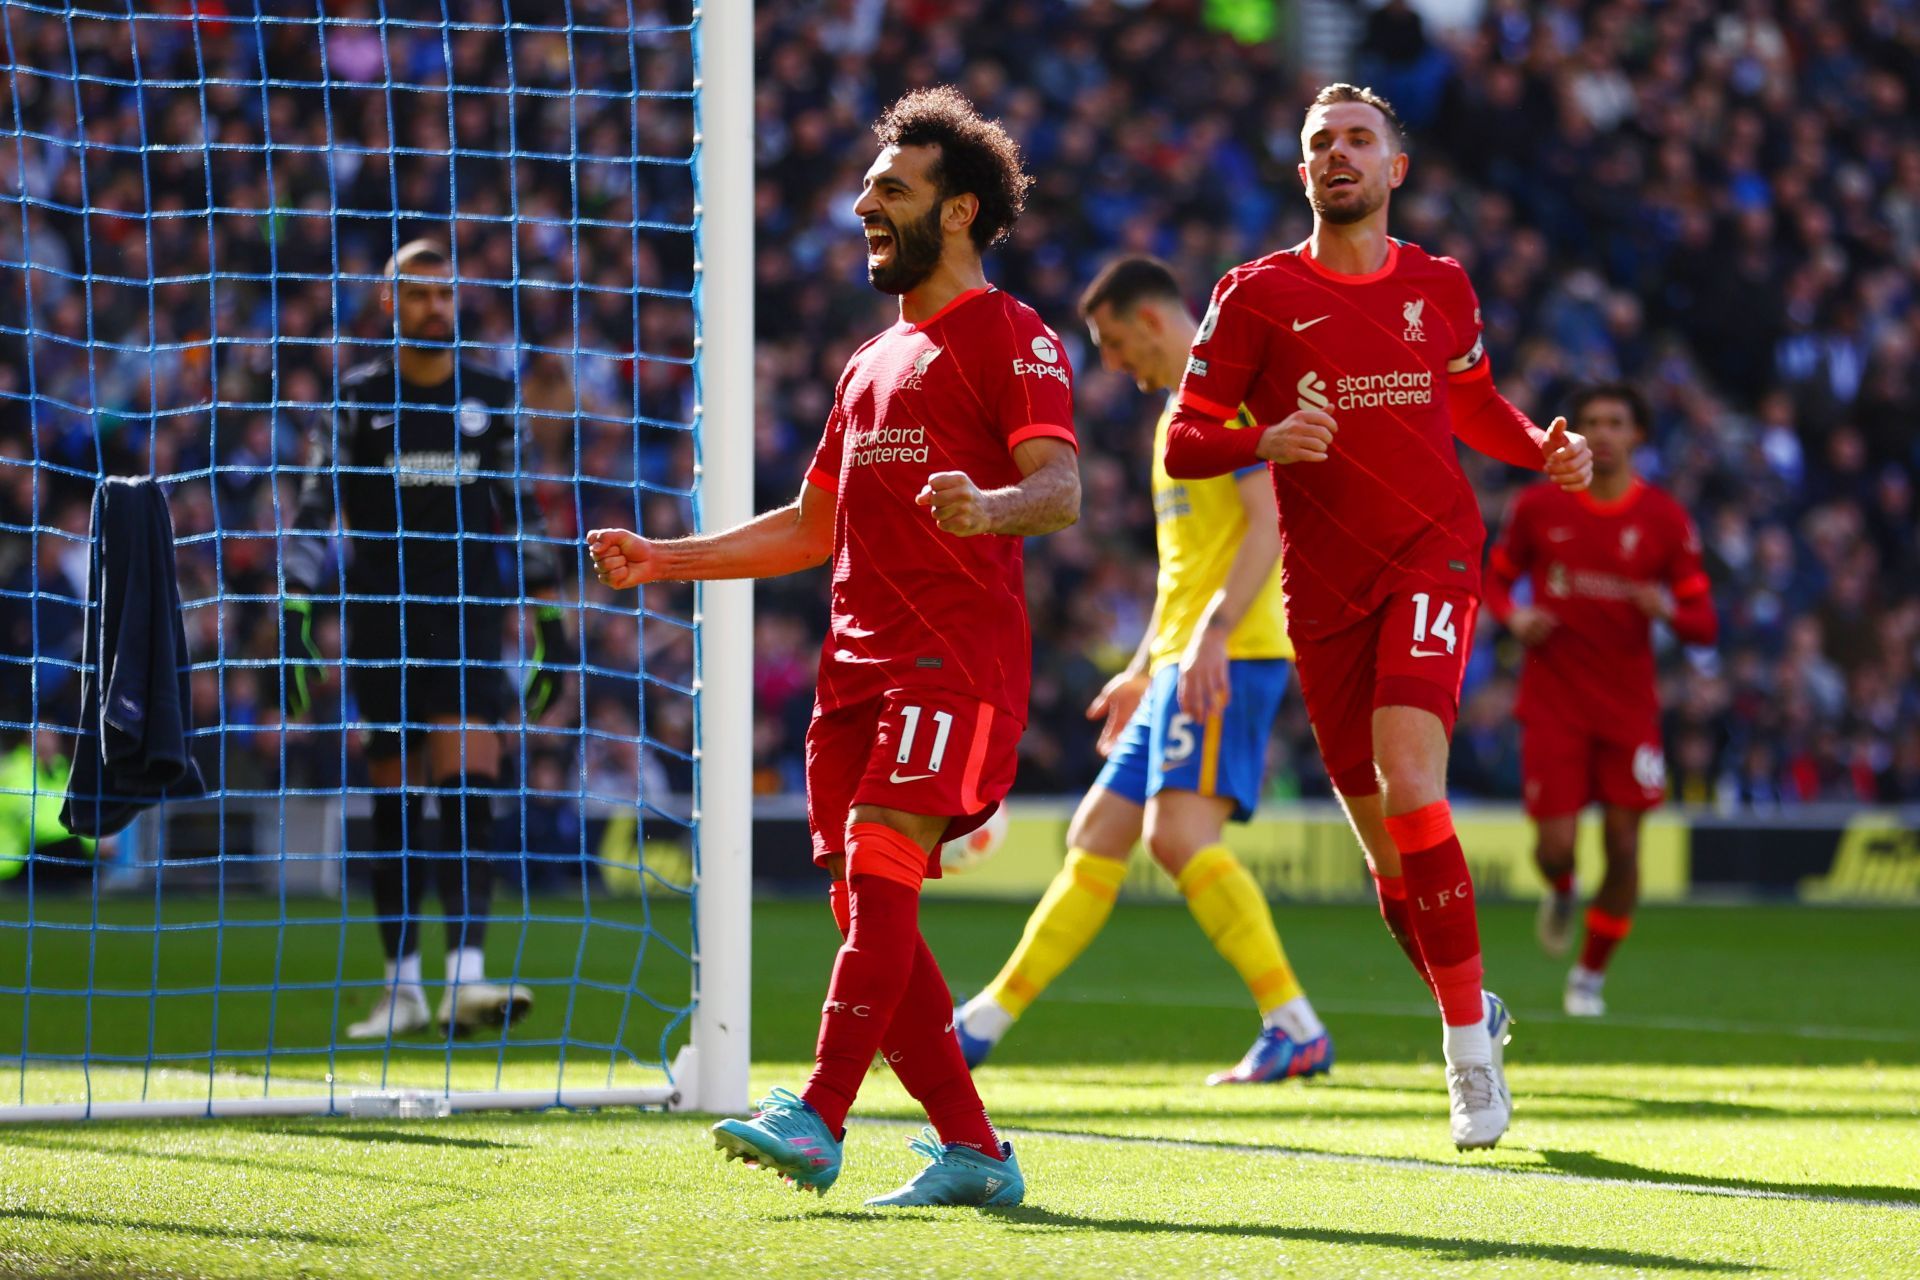 Liverpool have regained their status as a strong Premier League side